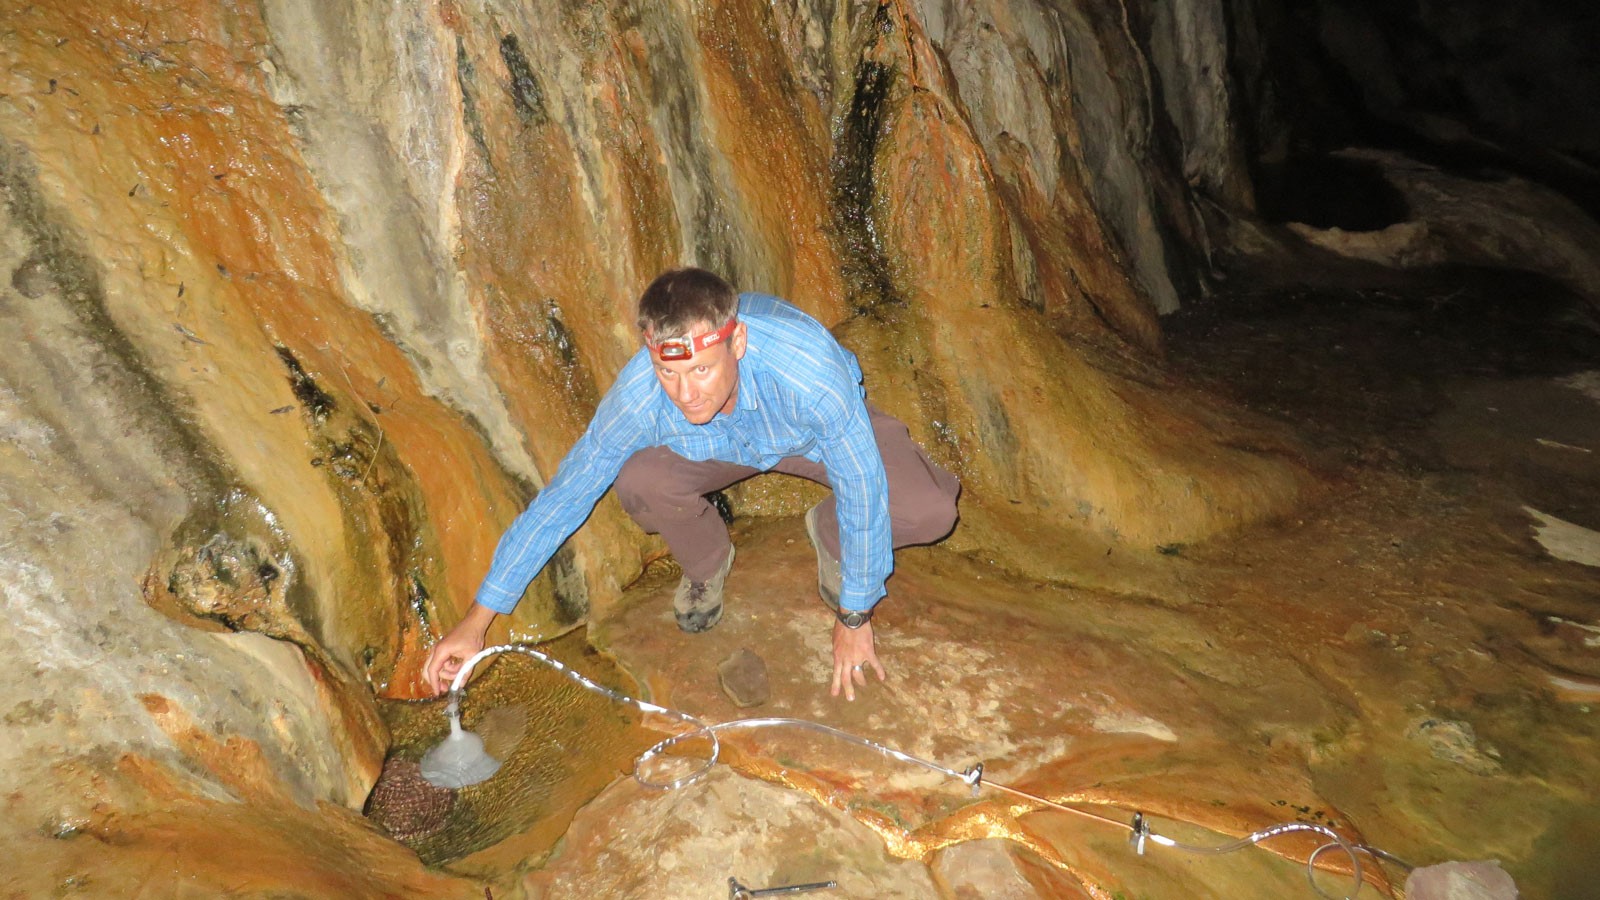 Geoscientist collects gas sample from hot spring.